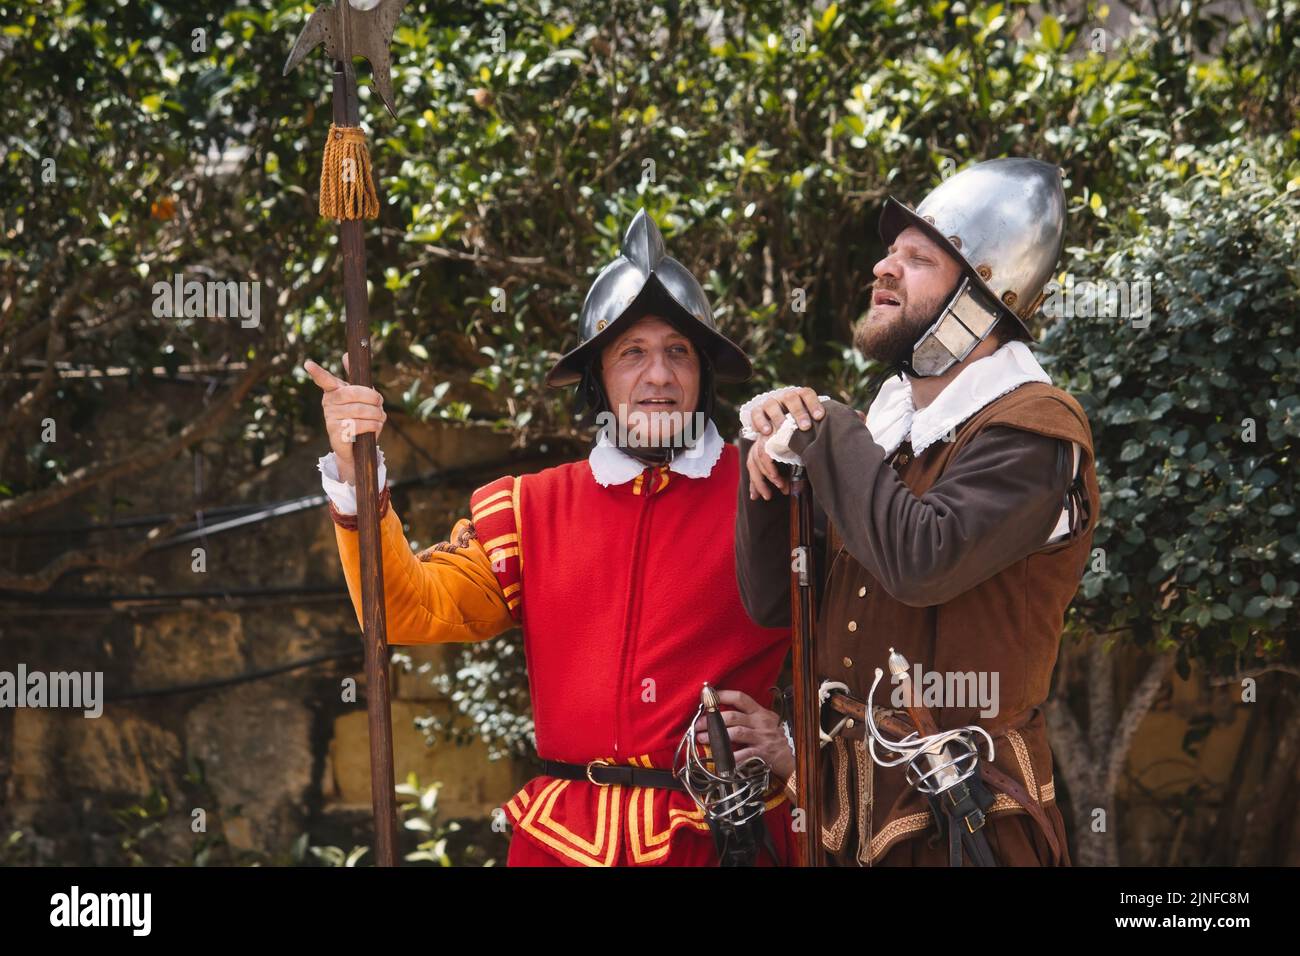 Buskett , Malta - June 29 2022: Two men dressed up as medieval soldiers as part of an historic reenactment Stock Photo